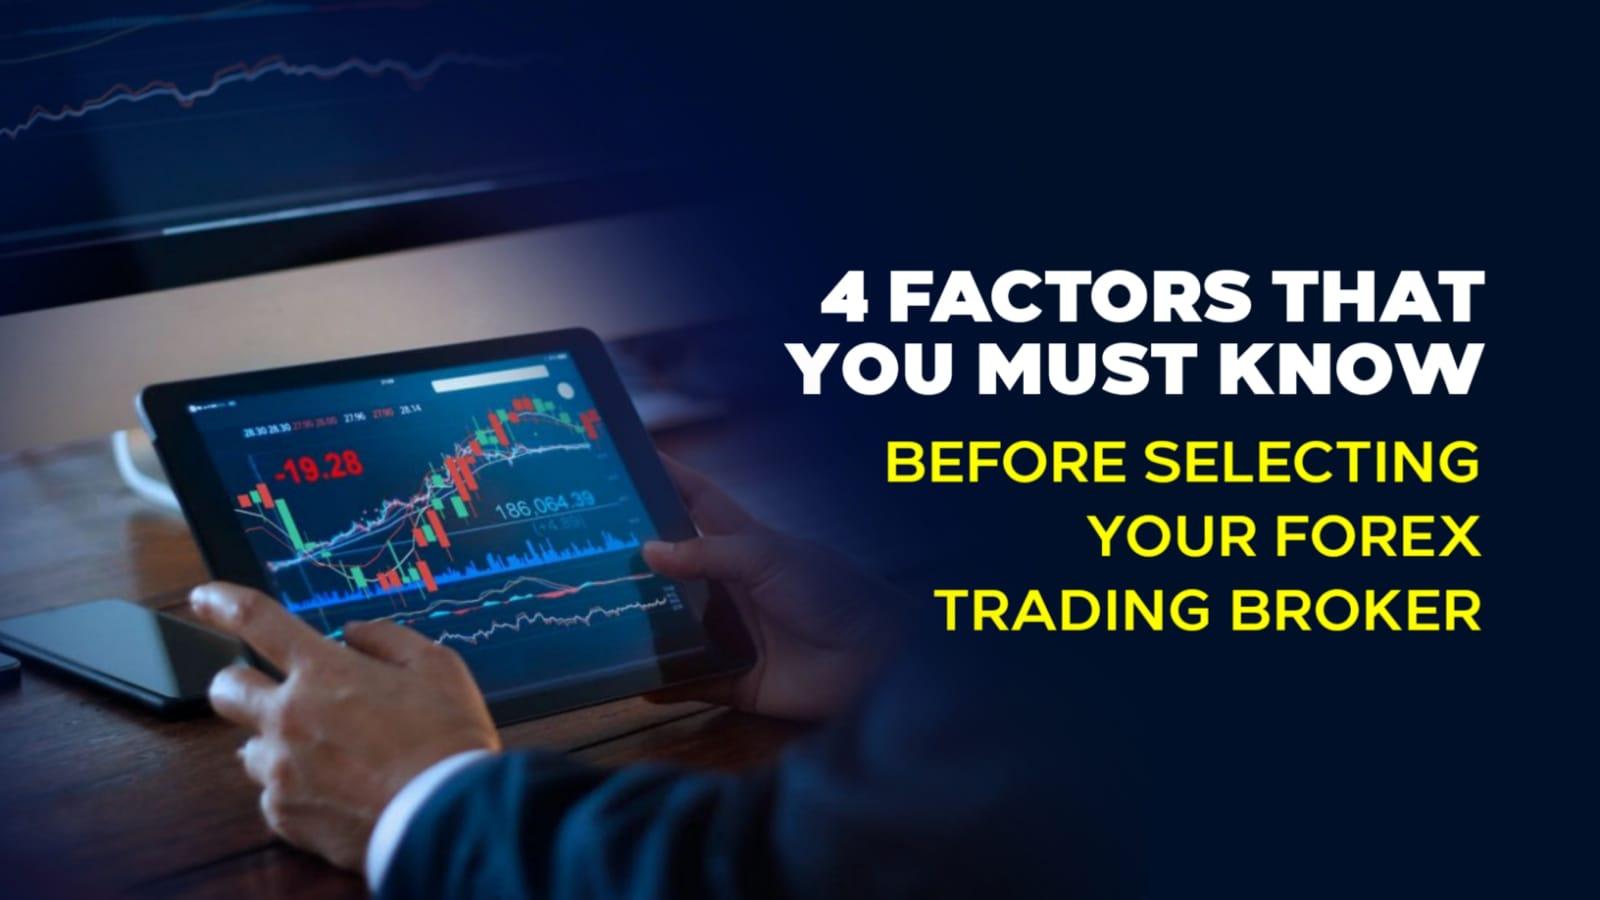 4 Factors That You Must Know Before Selecting Your Forex Trading Broker